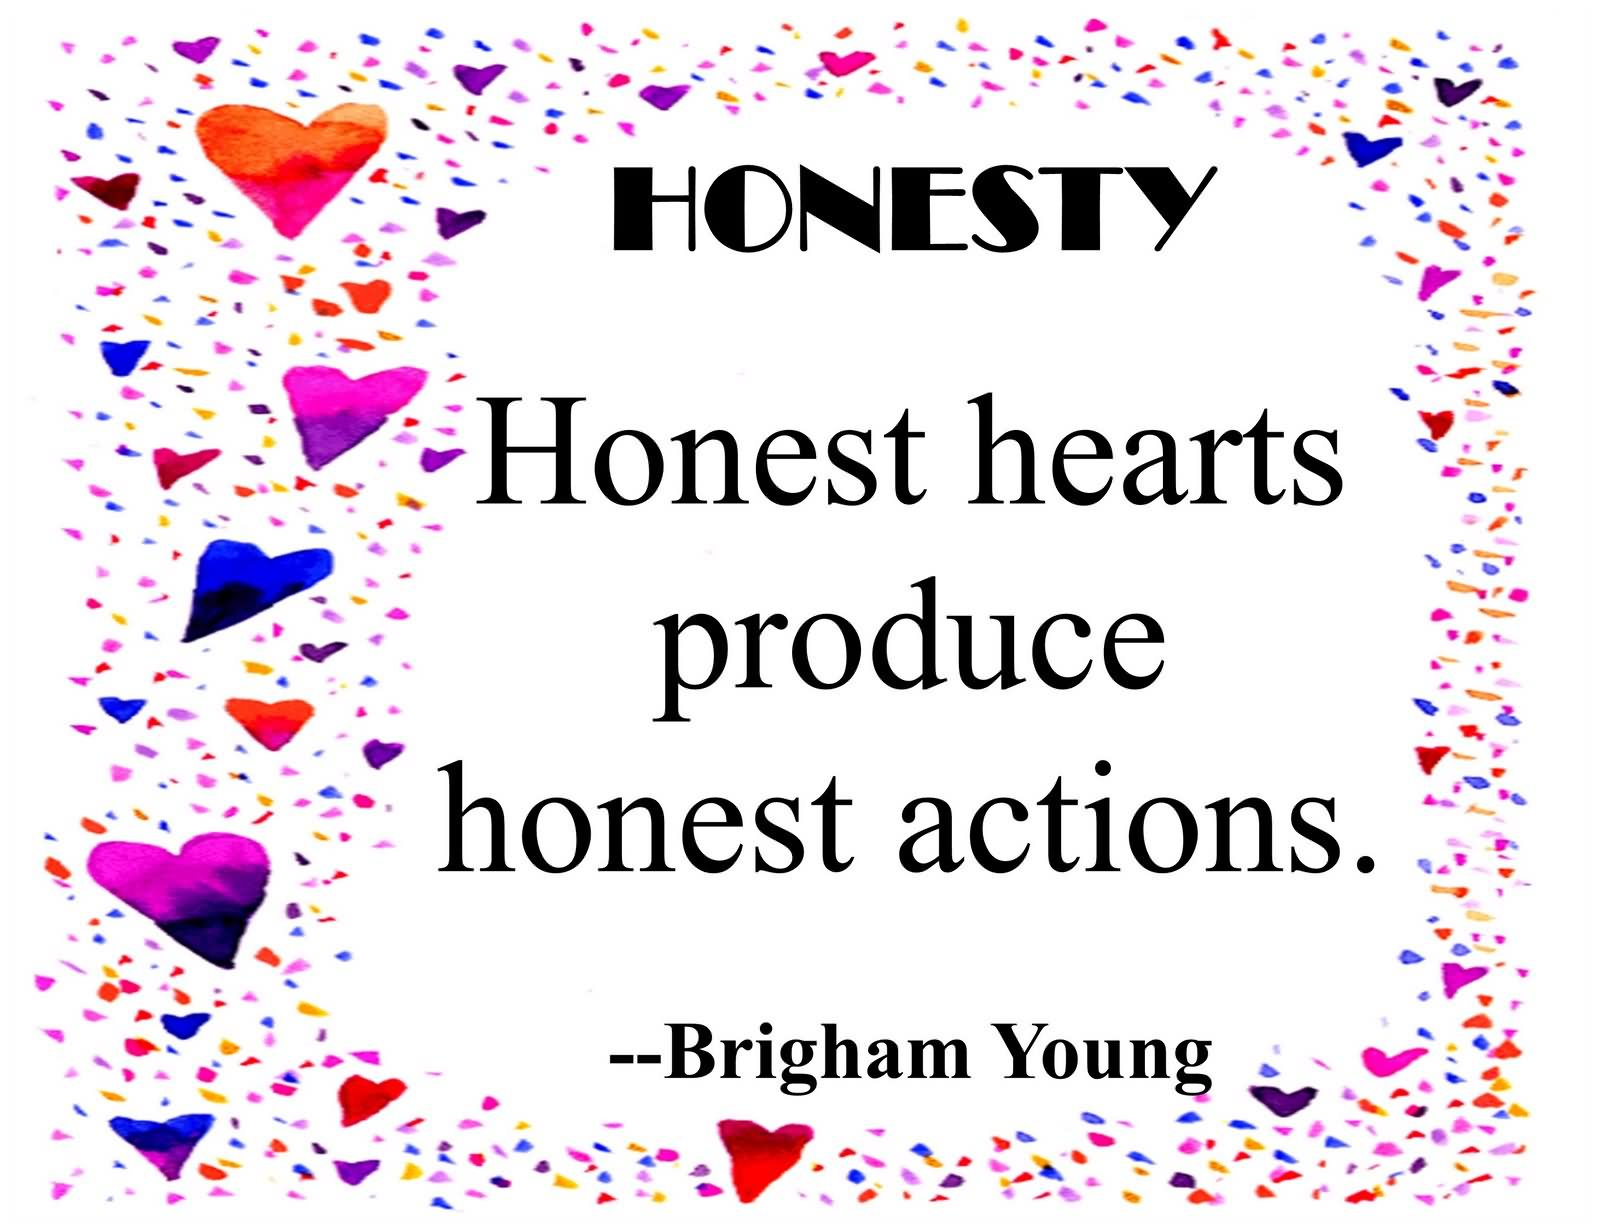 Honesty Honest hearts produce honest actions. - Brigham Young